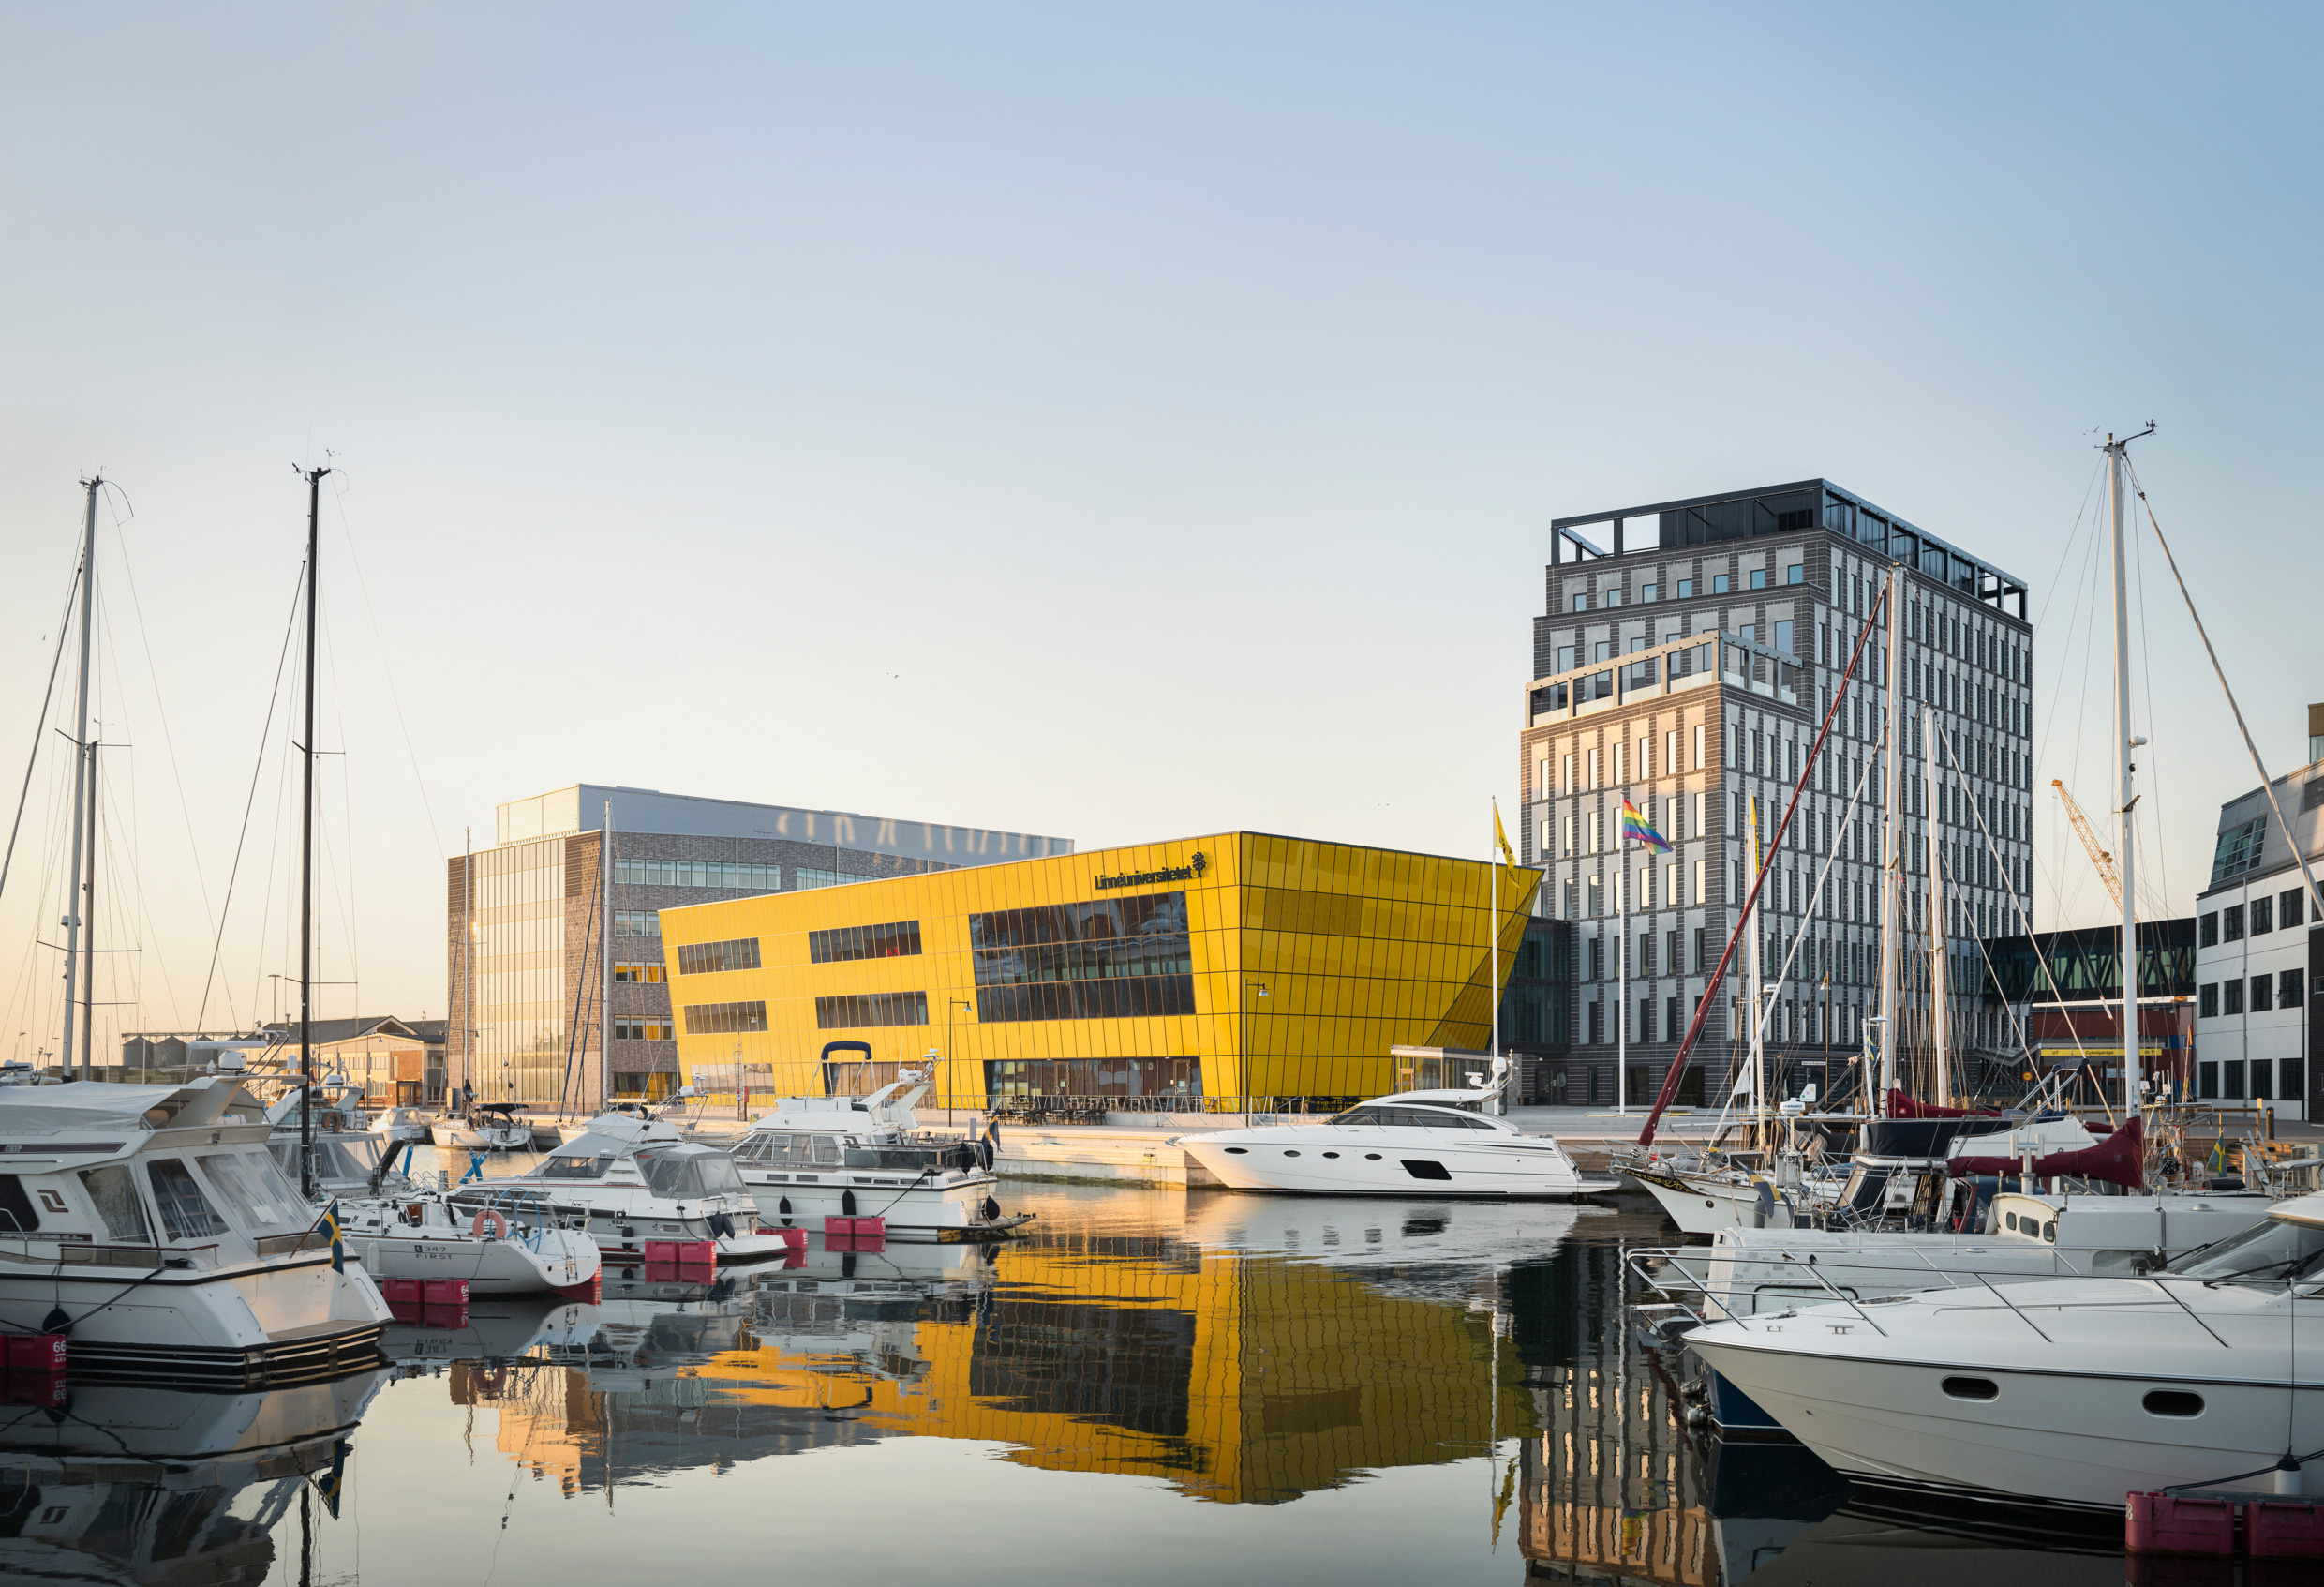 A harbour with boats fronts modern-looking large buildings.